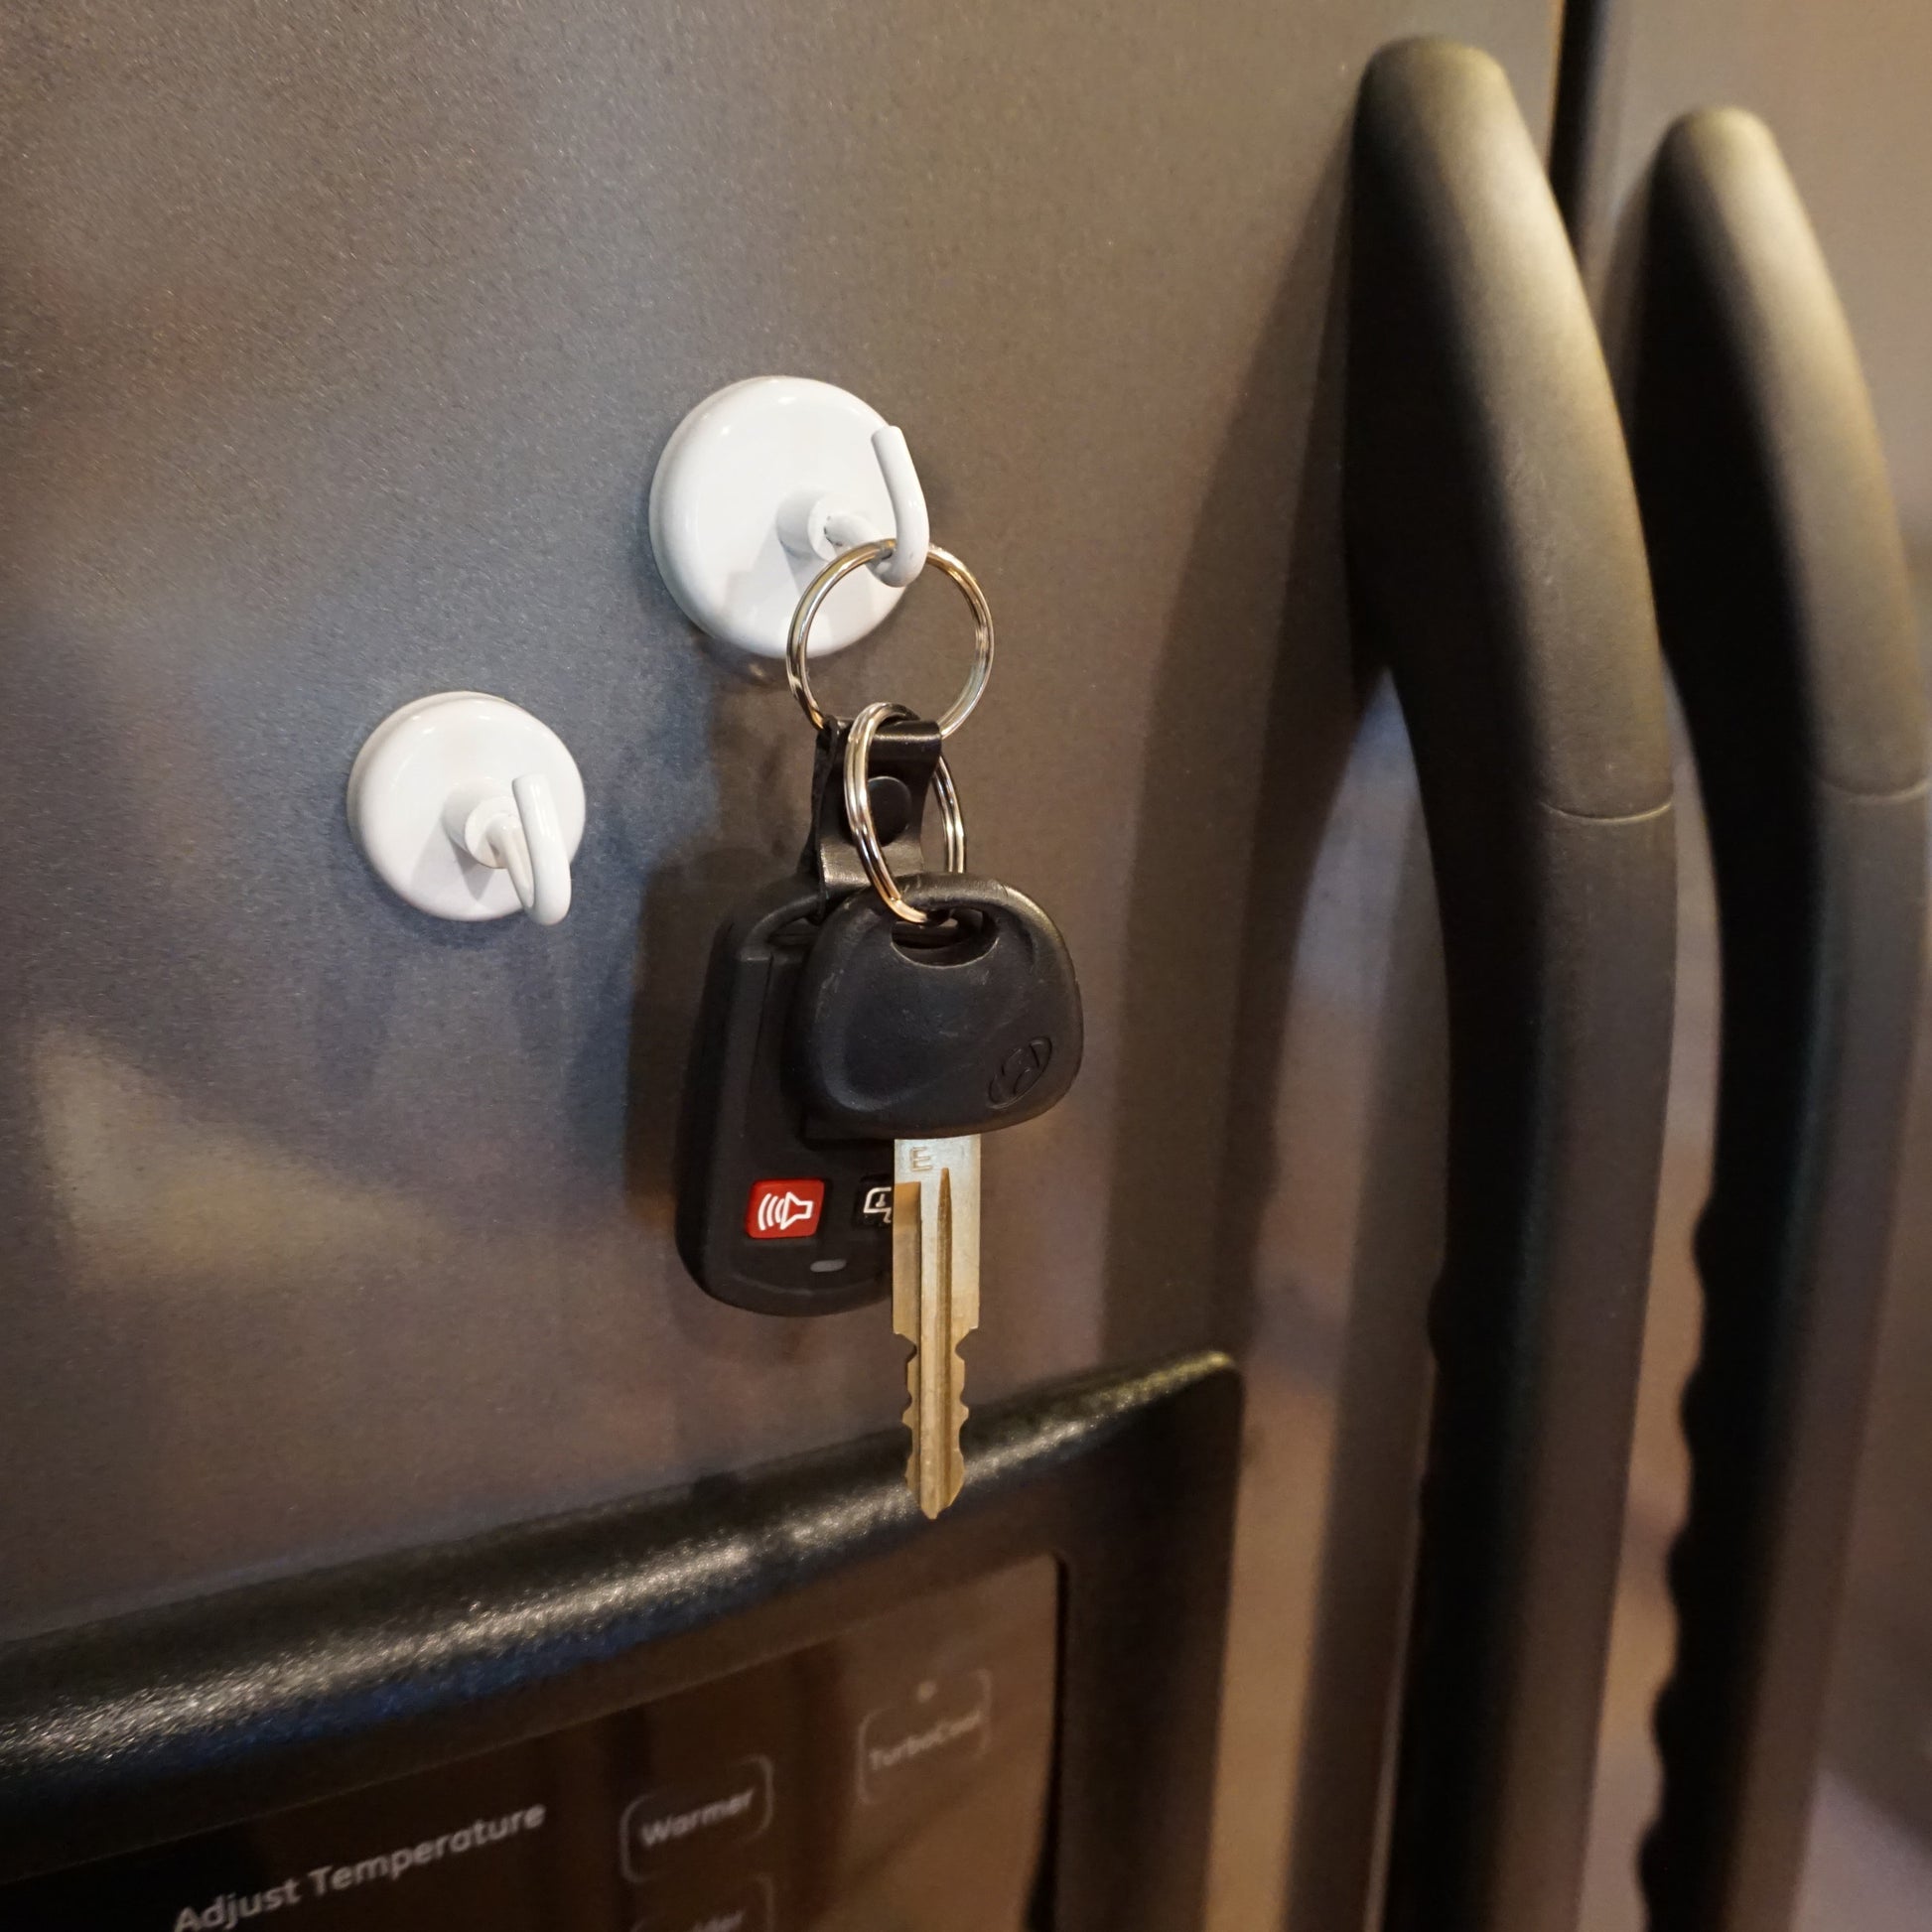 Load image into Gallery viewer, MHHH9 White Magnetic Hook - In Use on Refrigerator Holding a Set of Keys